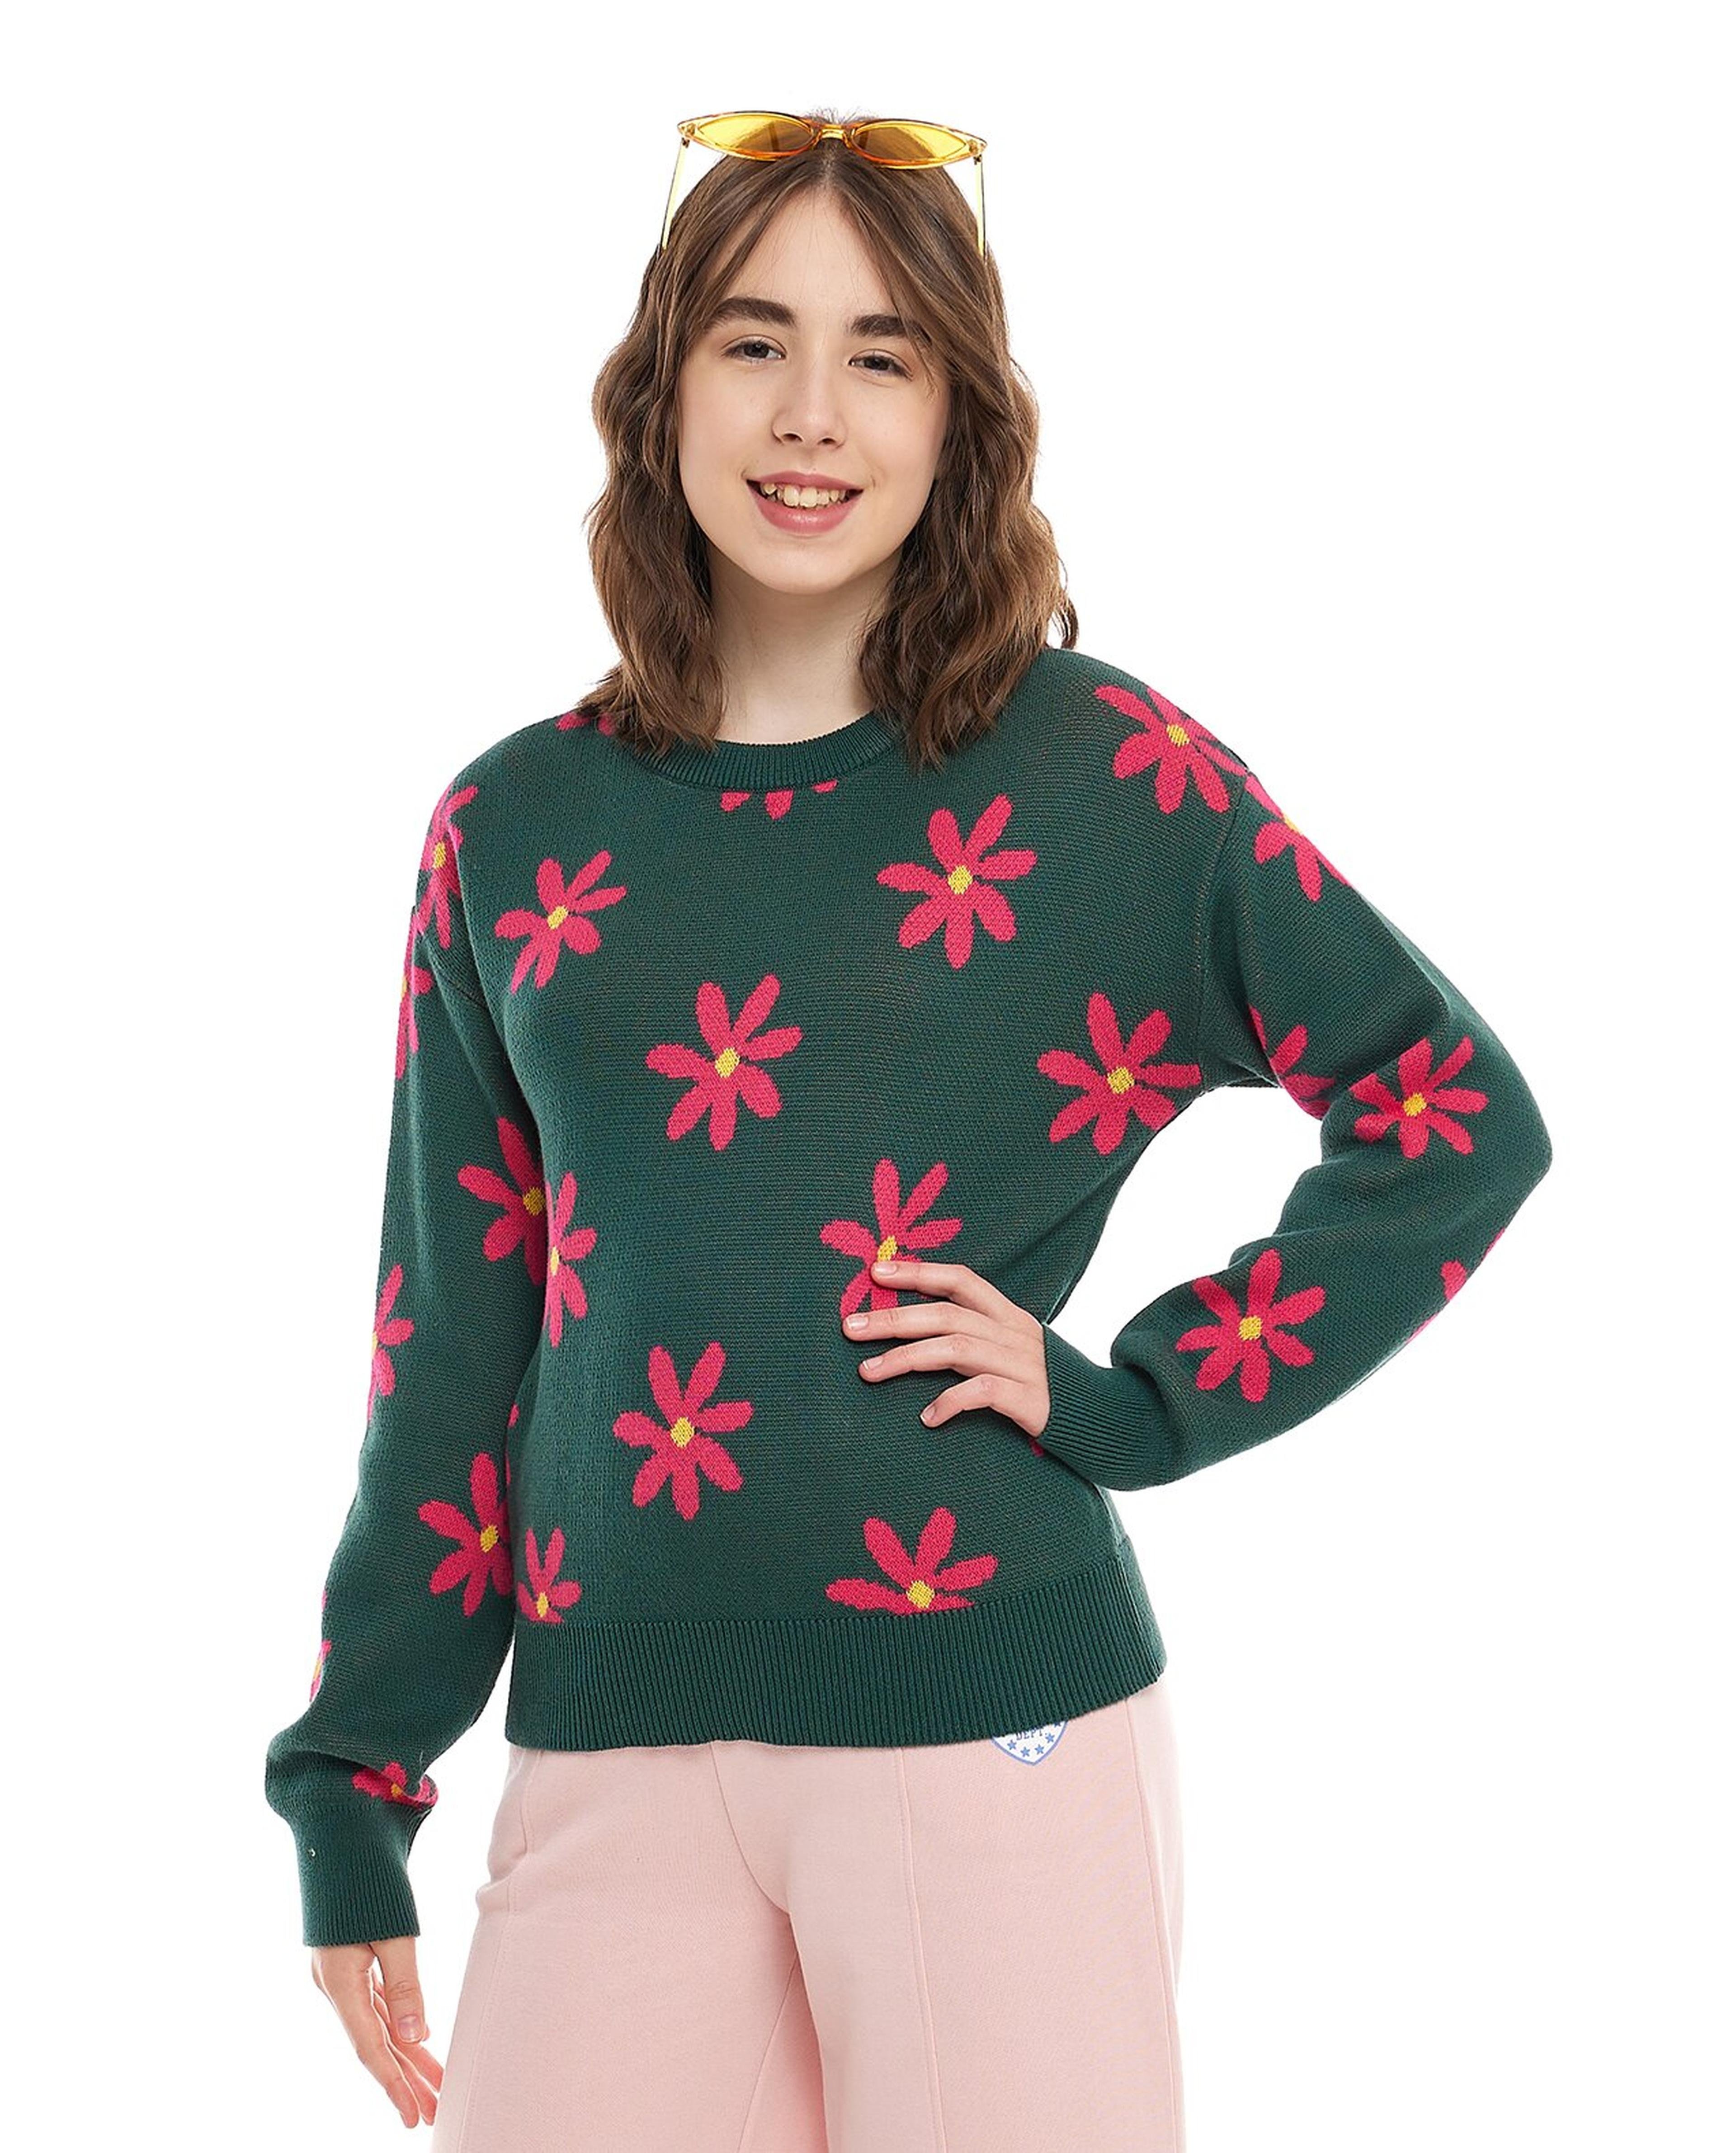 Floral Patterned Sweater with Crew Neck and Long Sleeves